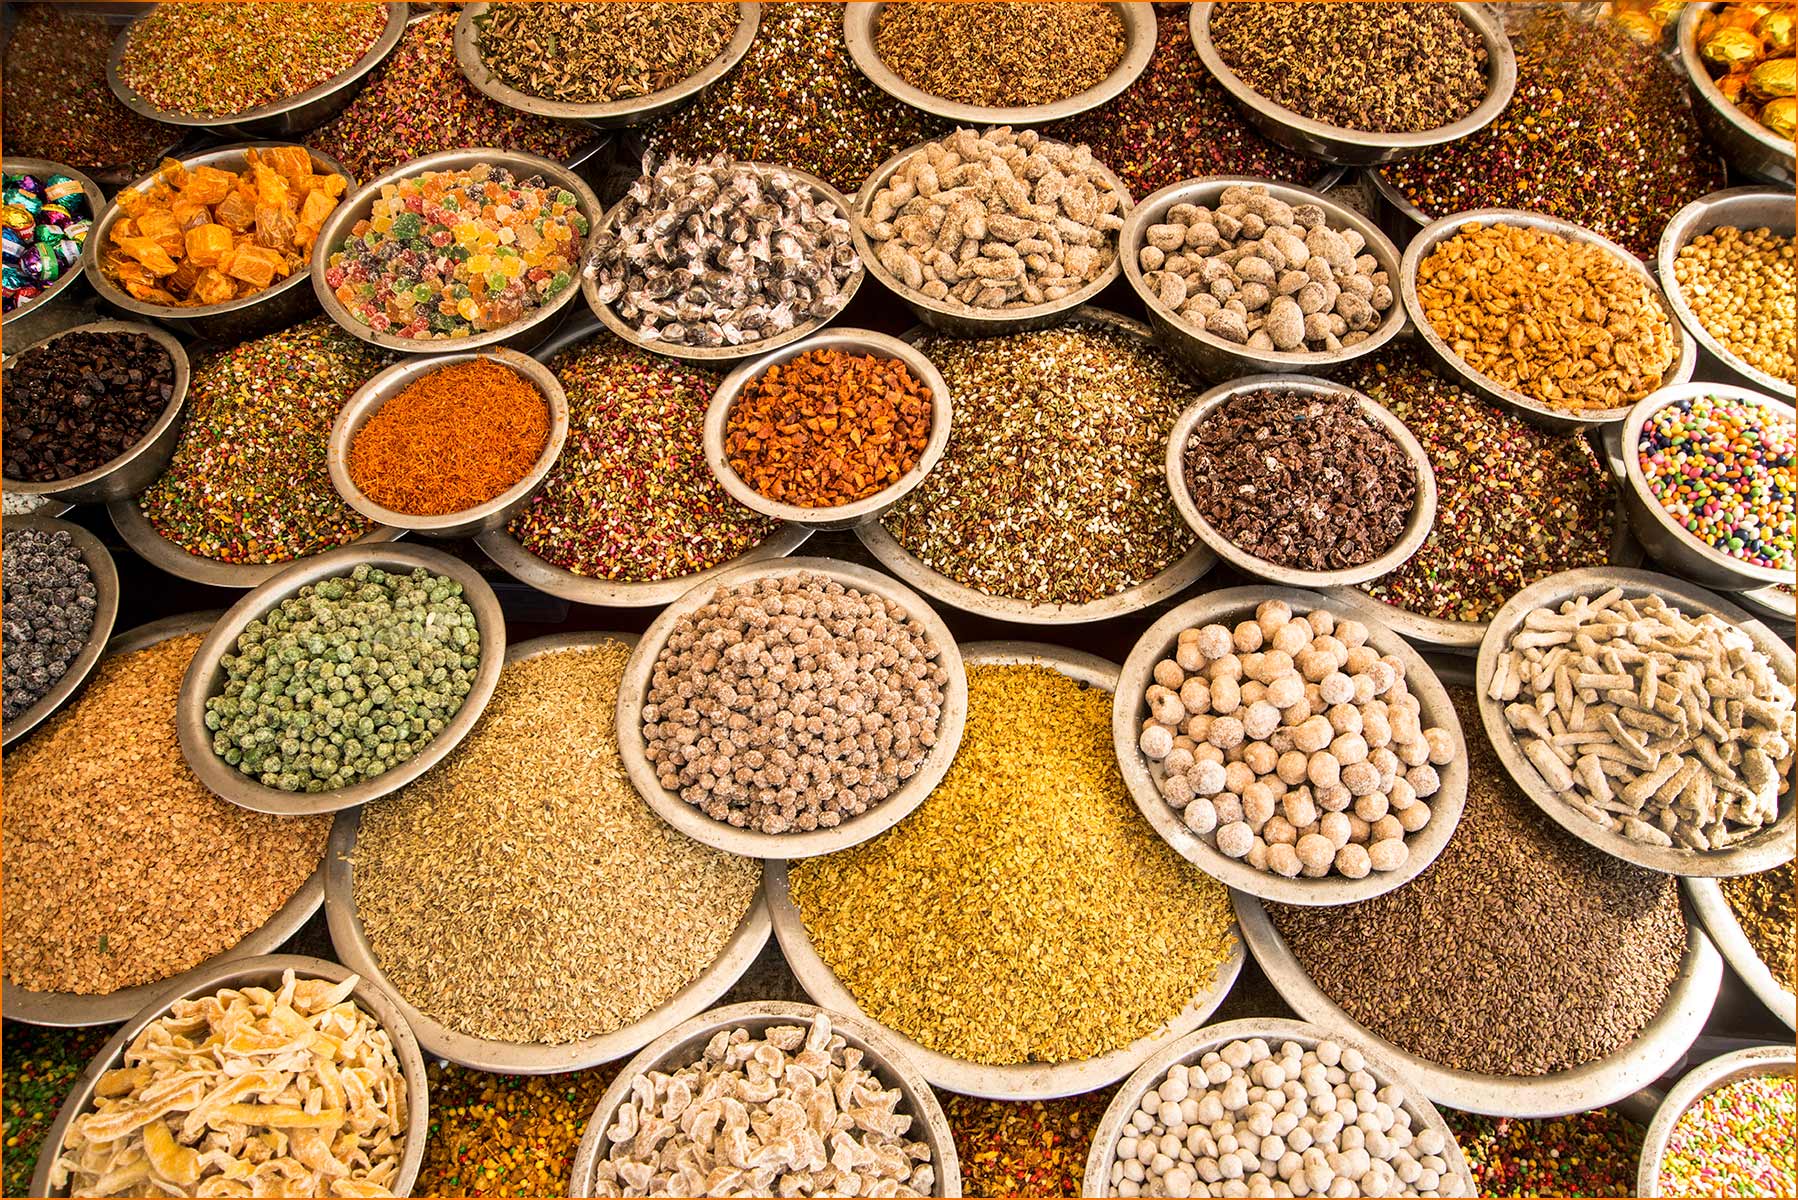 India: Spices